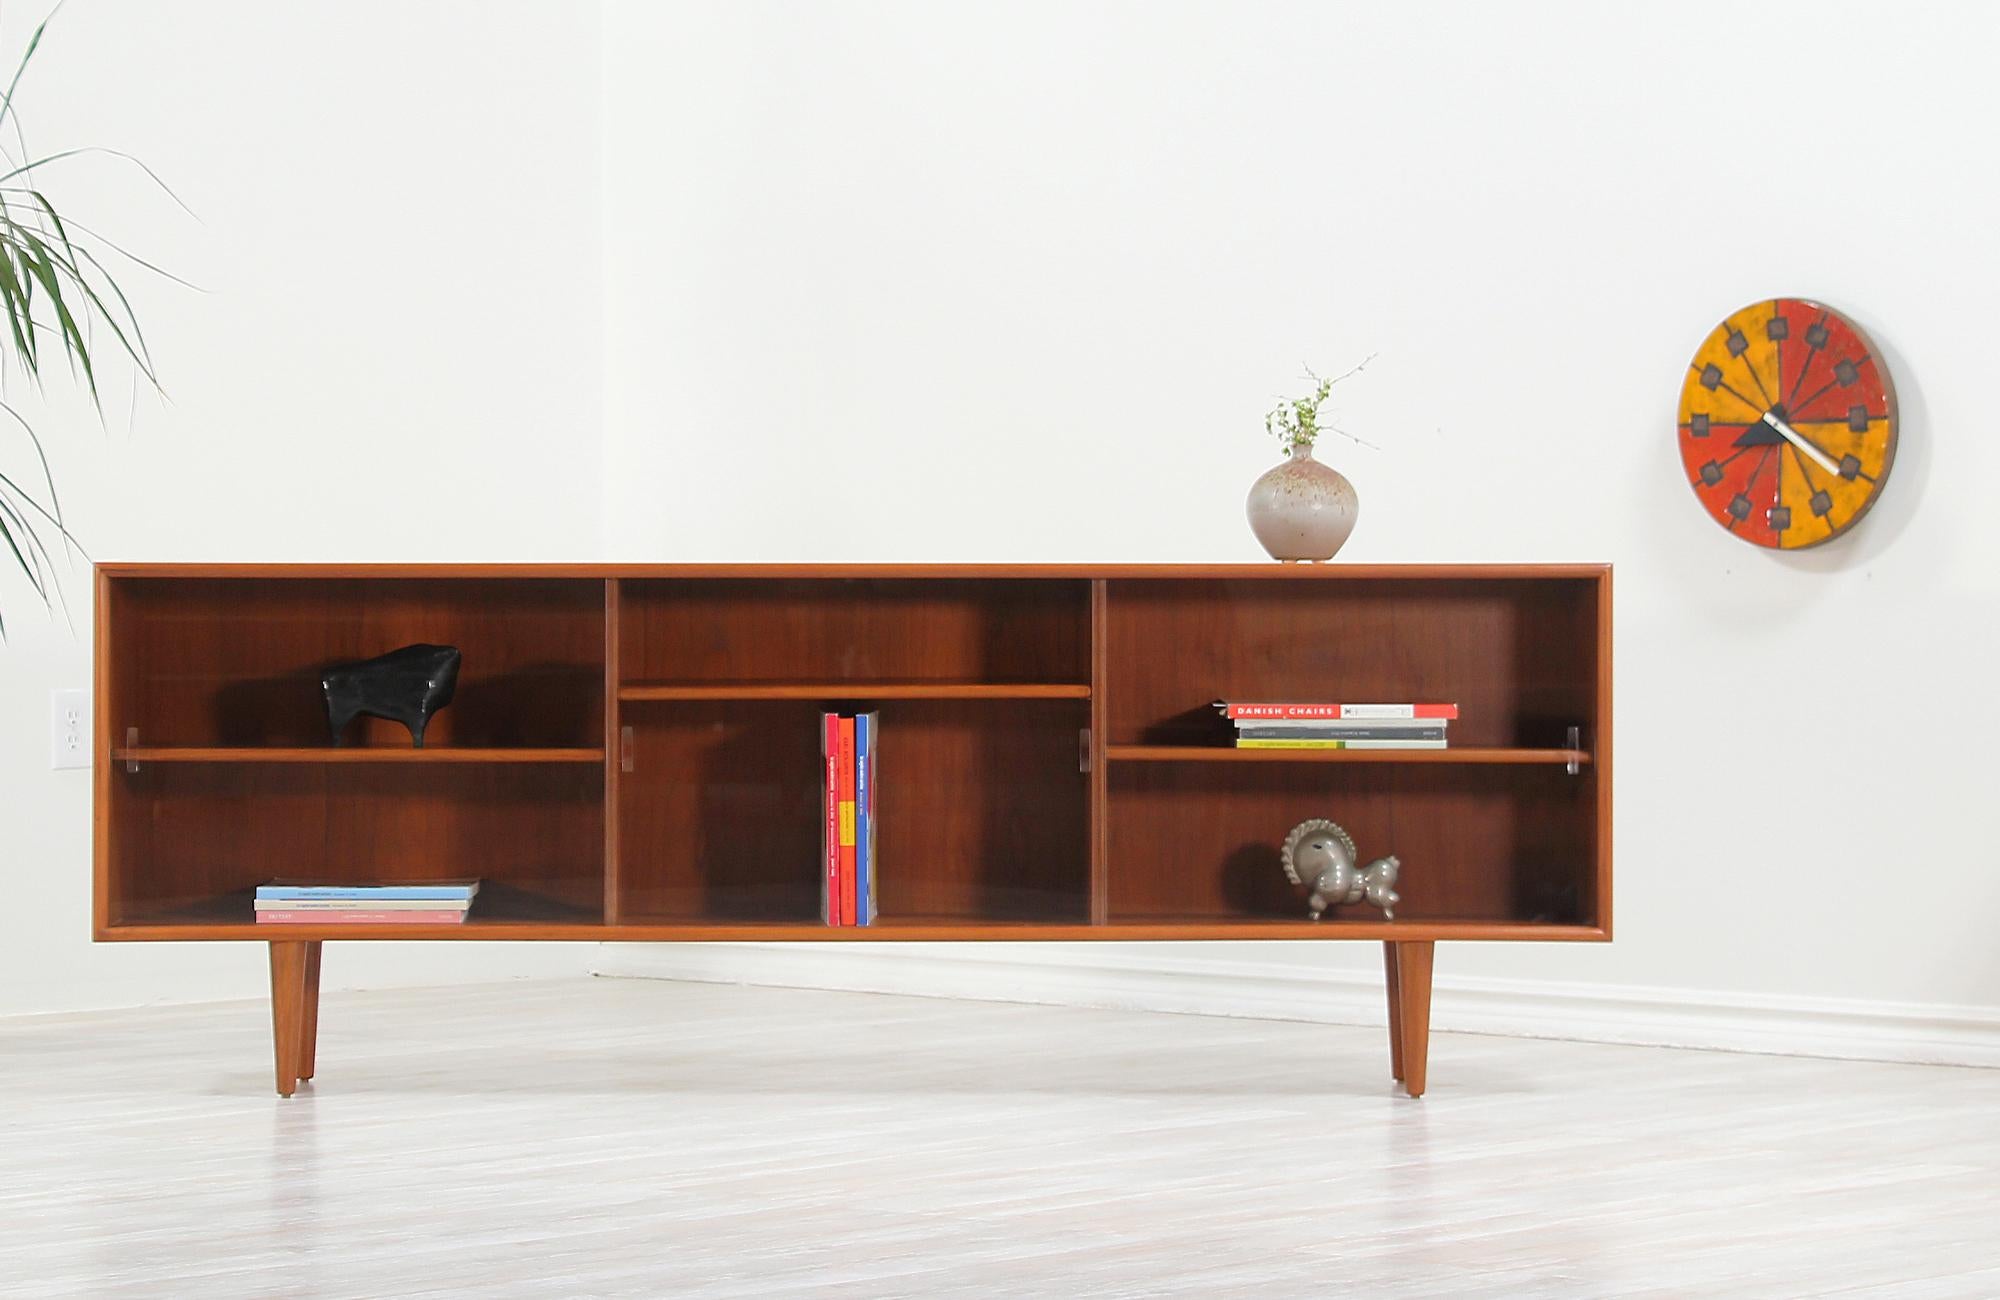 Minimalist Danish modern bookcase designed and manufactured by H.P. Hansen Møbelindustri in Denmark circa 1960s. This sleek design features a sturdy teak case sitting on four tapered legs with its original sliding glass doors. The interior is